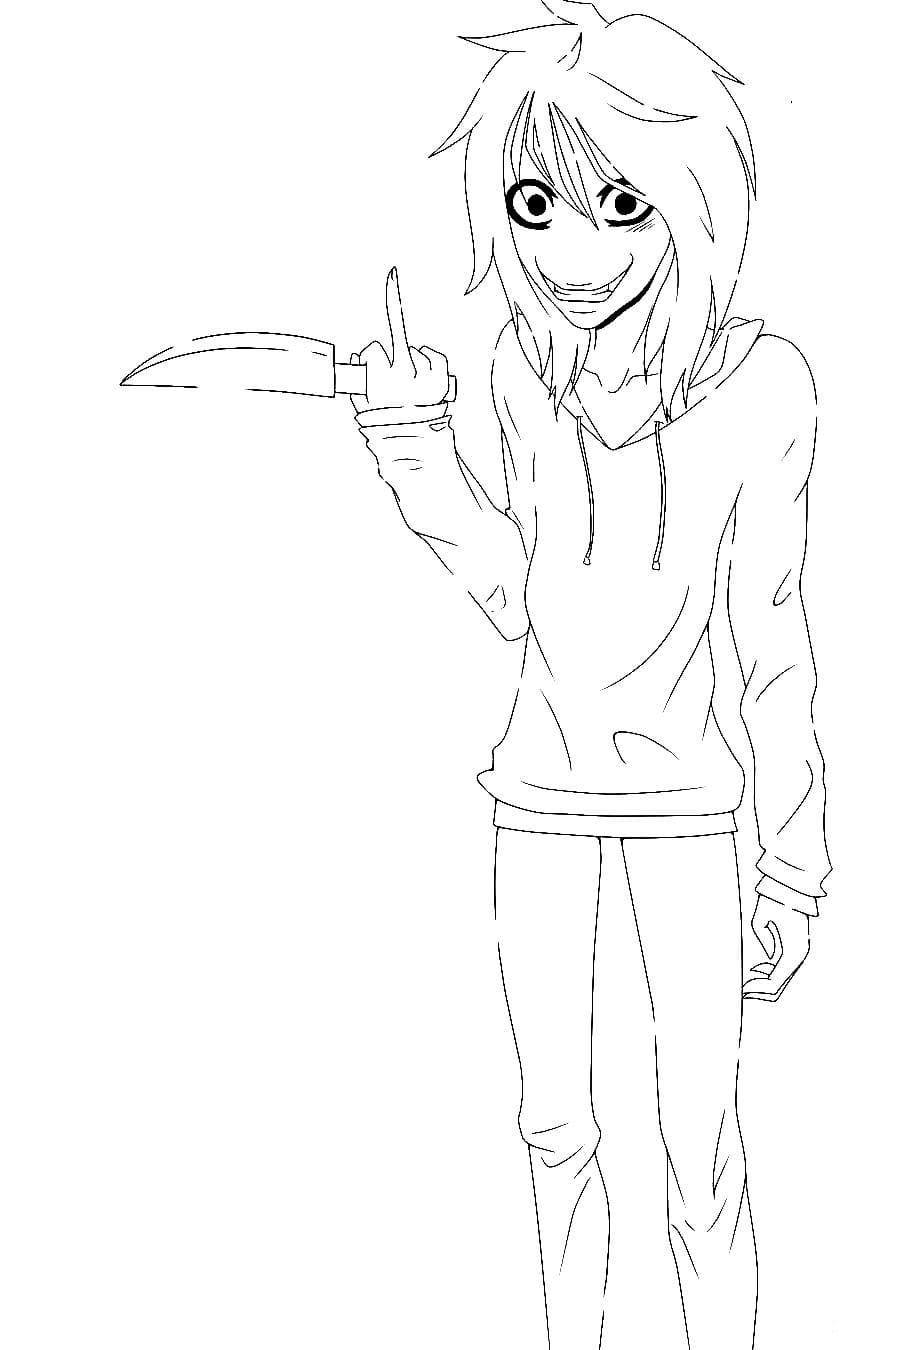 Jeff the Killer with a knife.